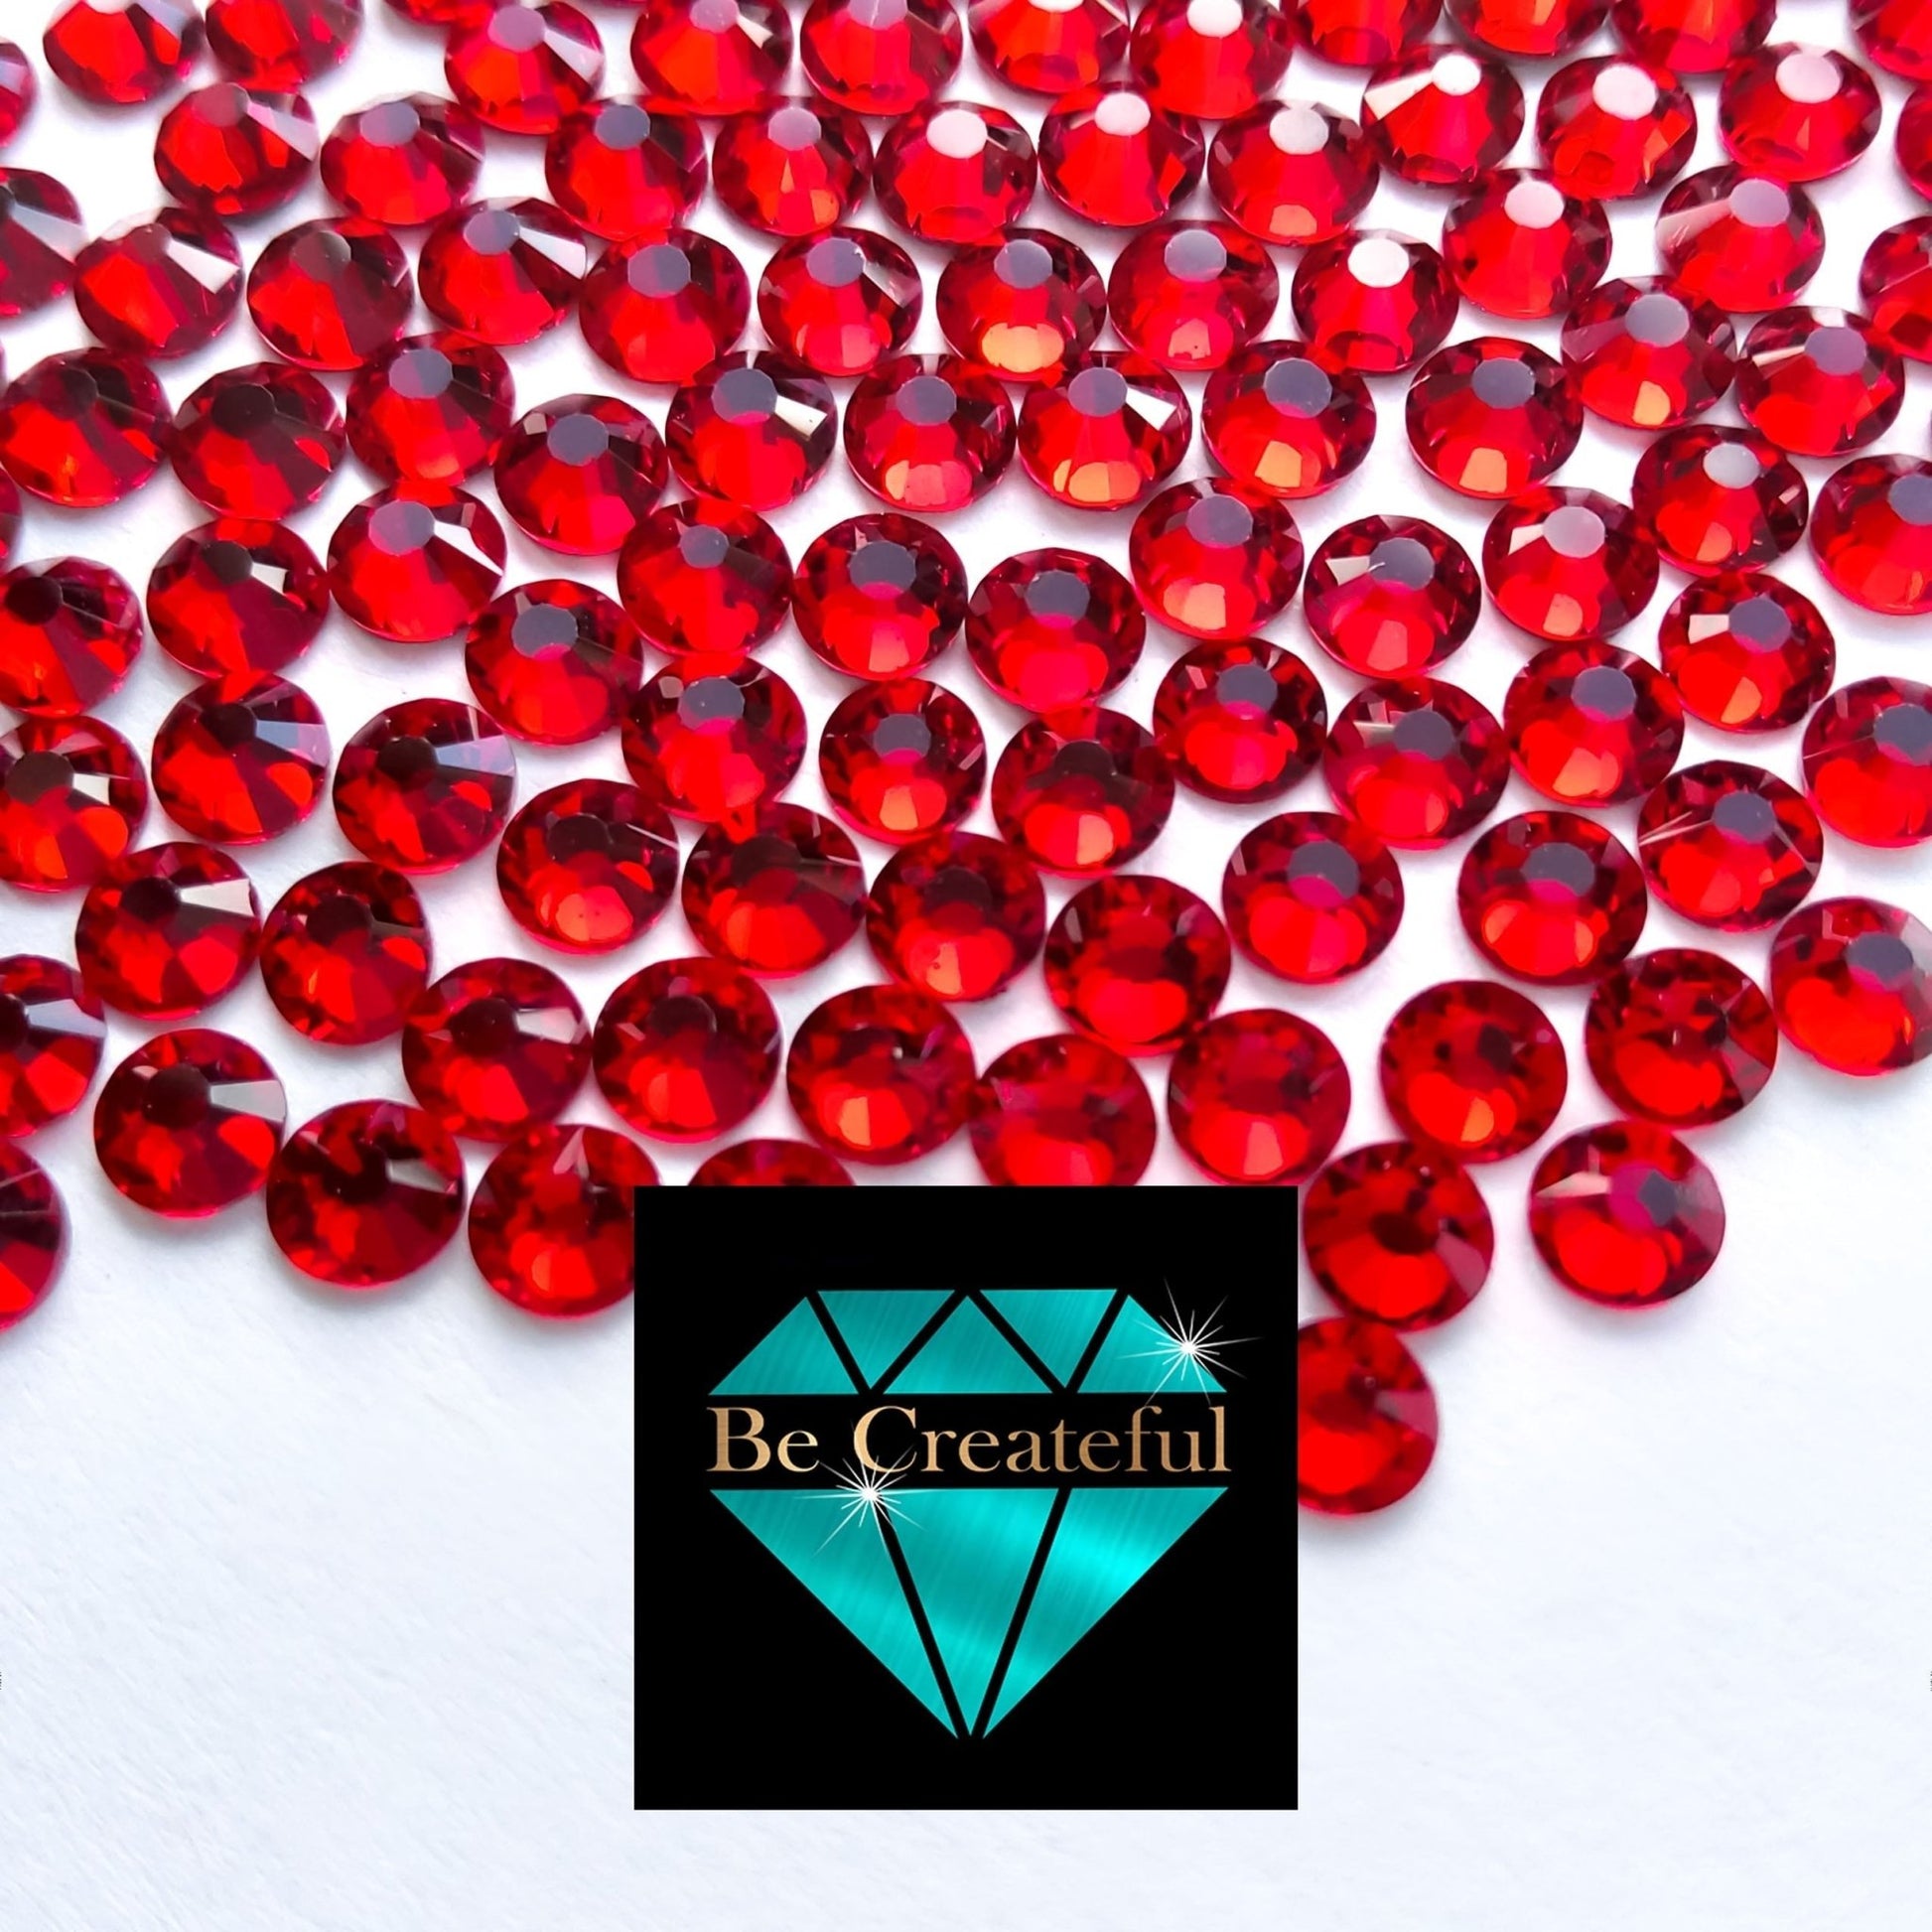 Be Createful LUXE® Siam Red Hotfix Rhinestones are high-quality 16 facet glass Rhinestone with intense sparkle and refraction